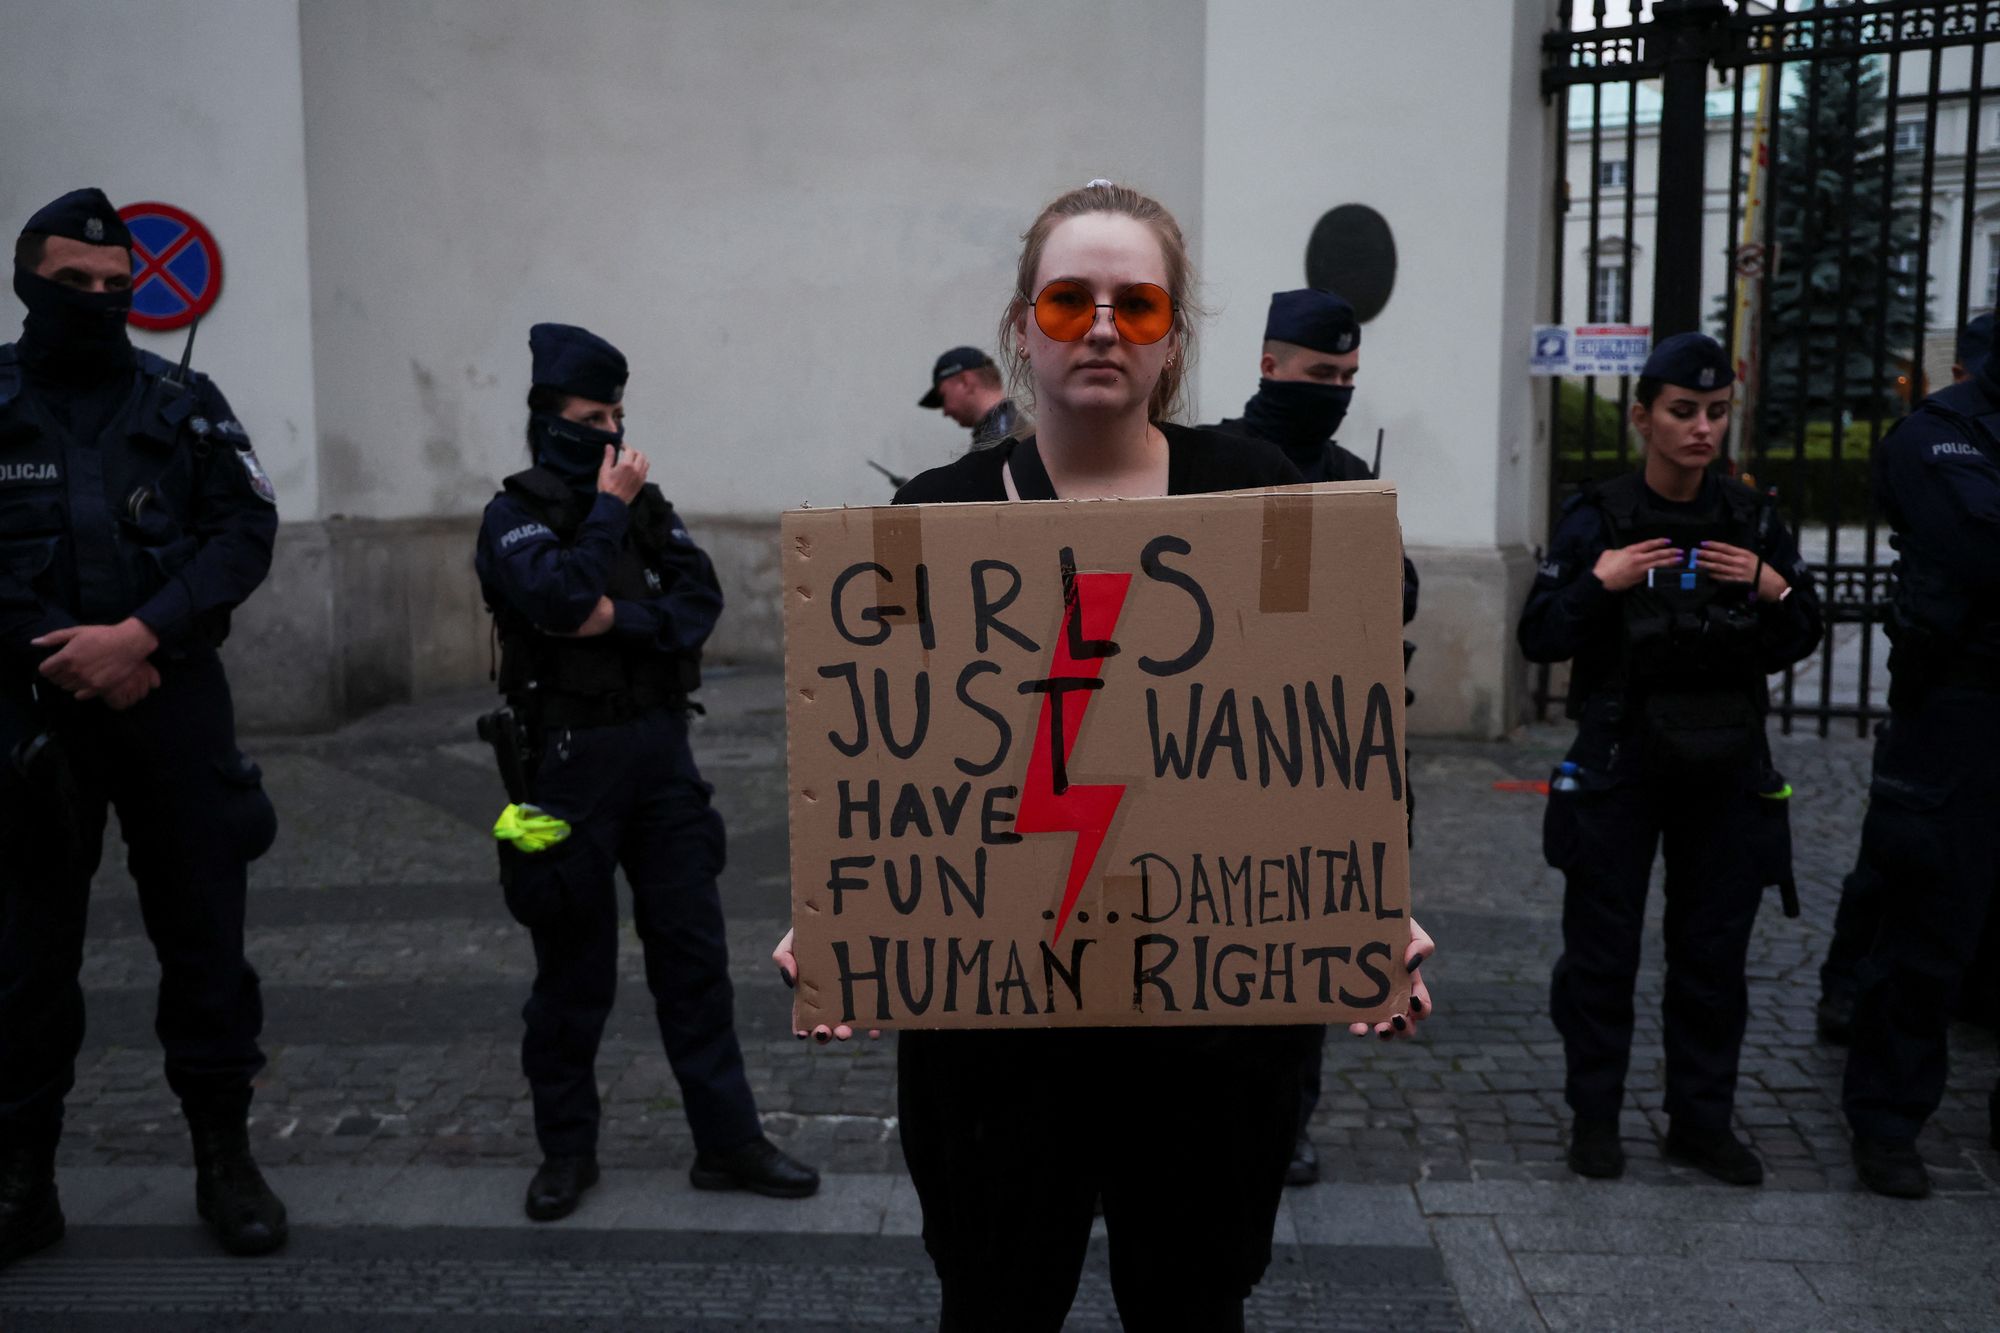 Poland abortion law protests